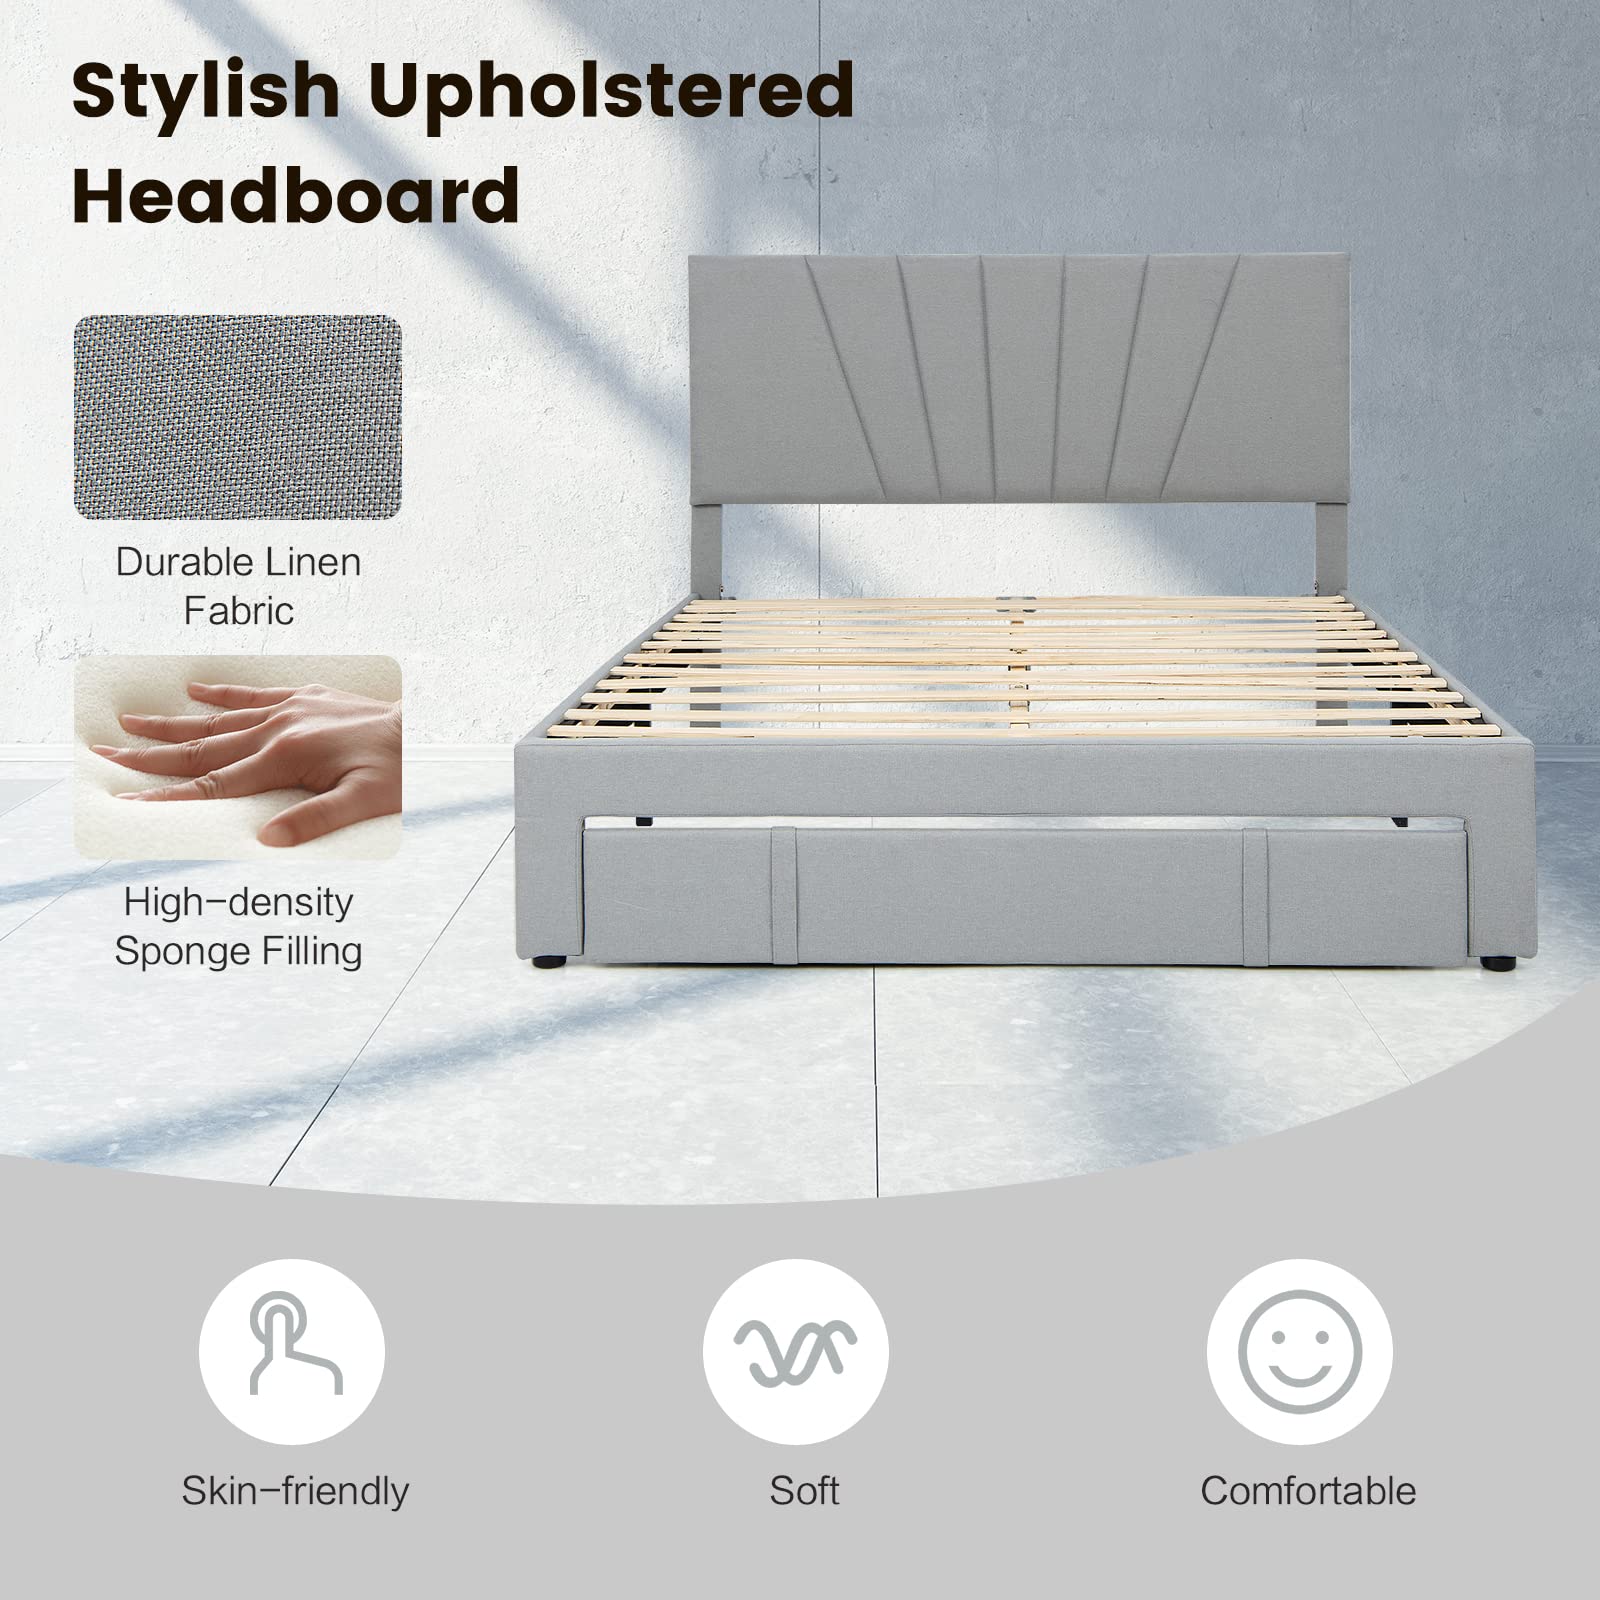 Giantex Upholstered Queen Bed Frame with Drawer, Modern Platform Bed with Storage & Adjustable Headboard